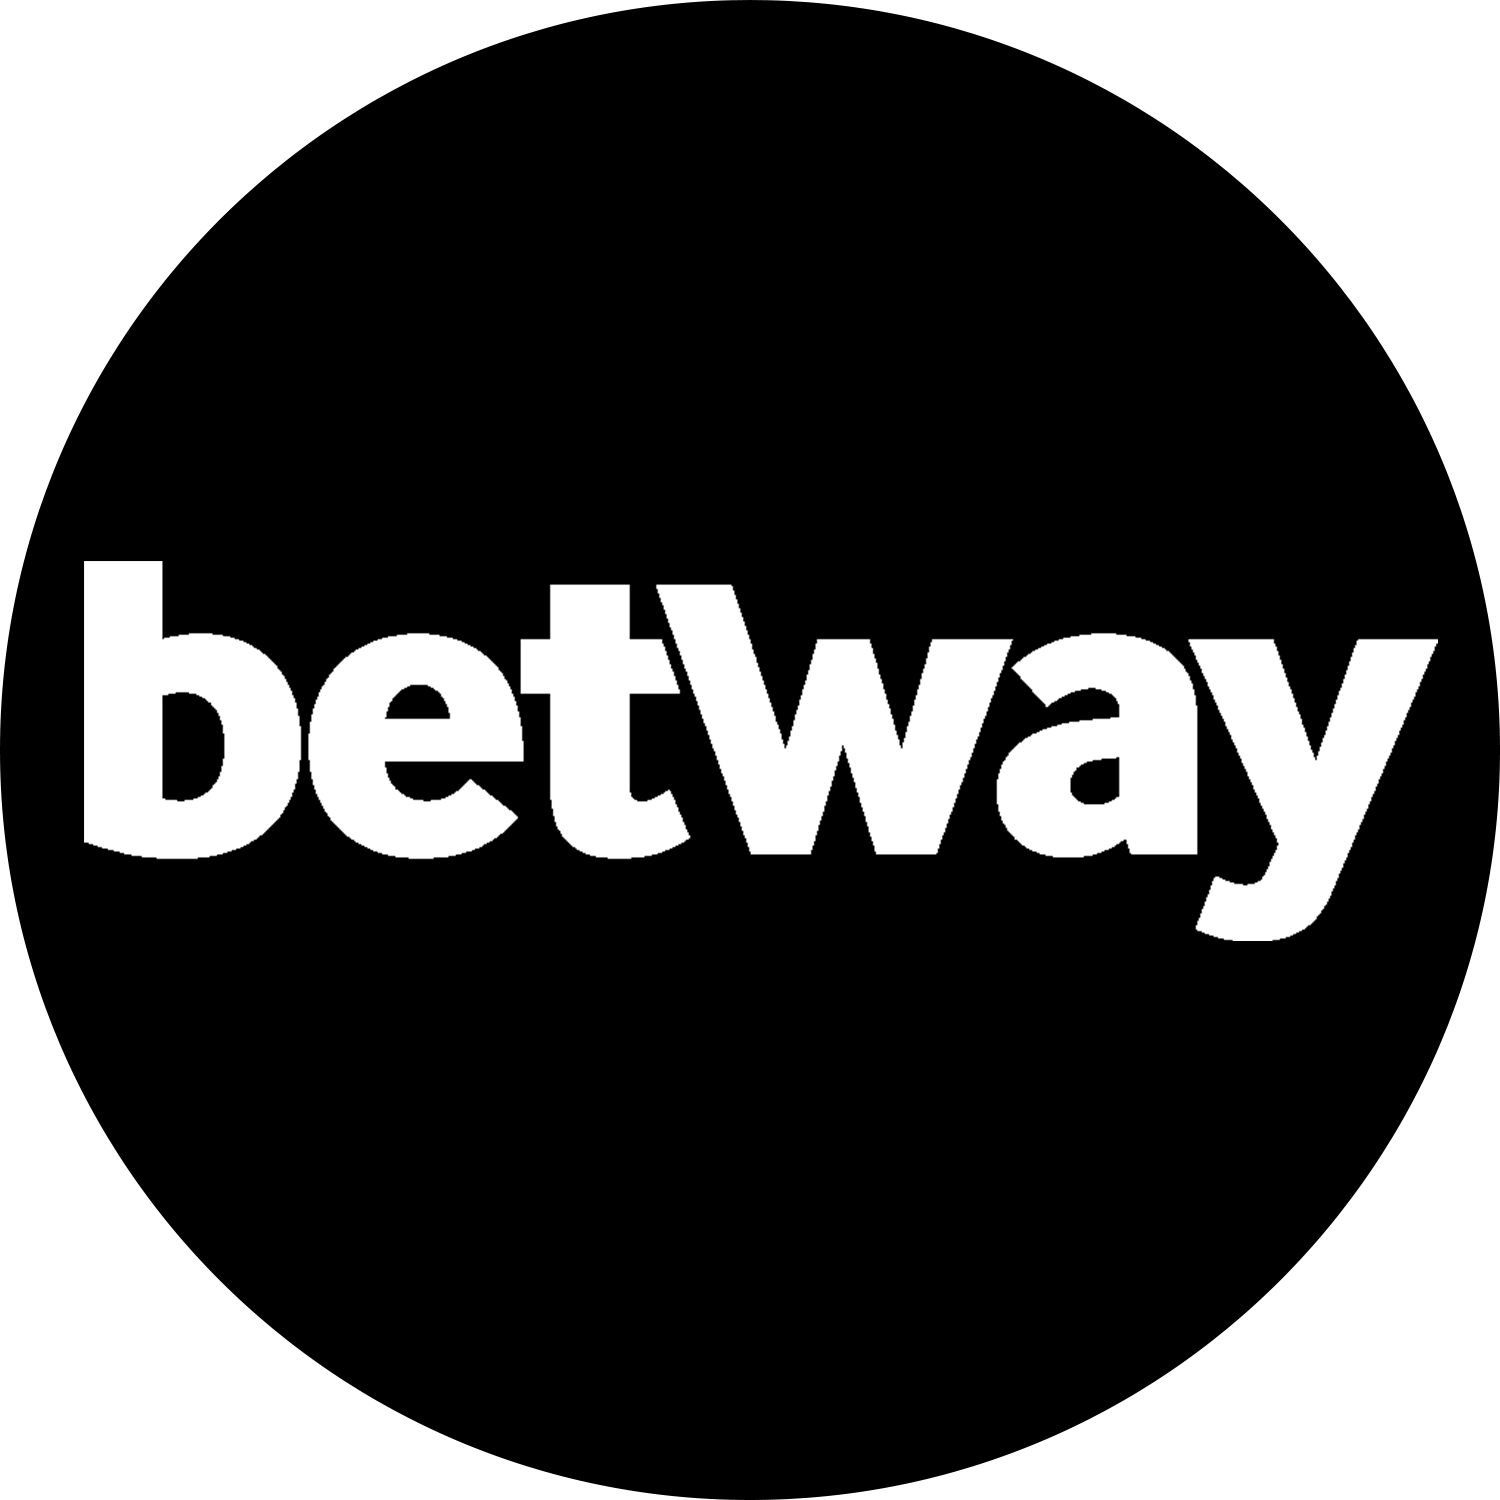 Betway is one of the most well-known and trusted casino.